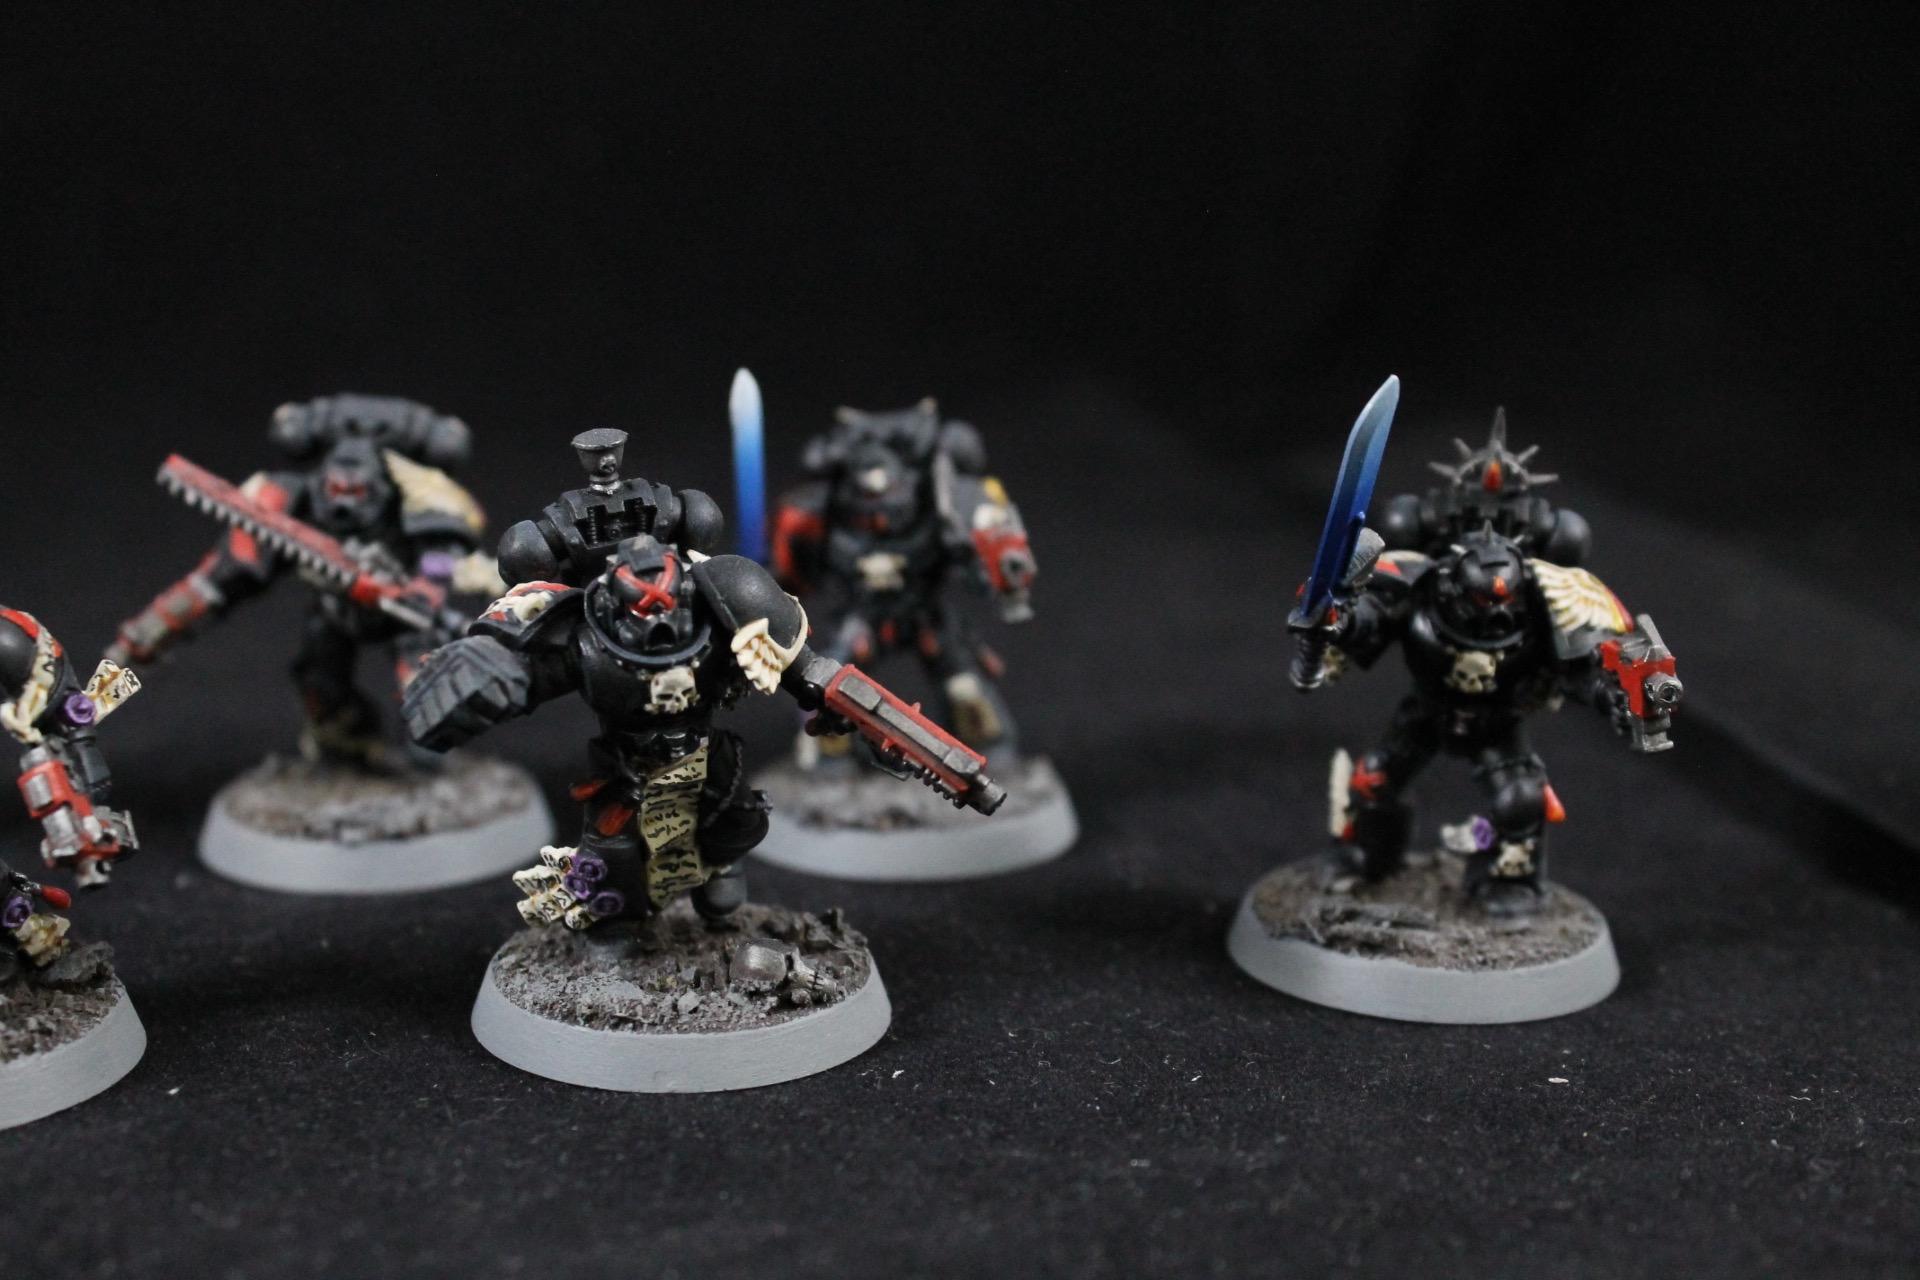 Black Armorm, Black Rage, Blood Angels, Commision, Death Company, Power Weapons, Professional, Red